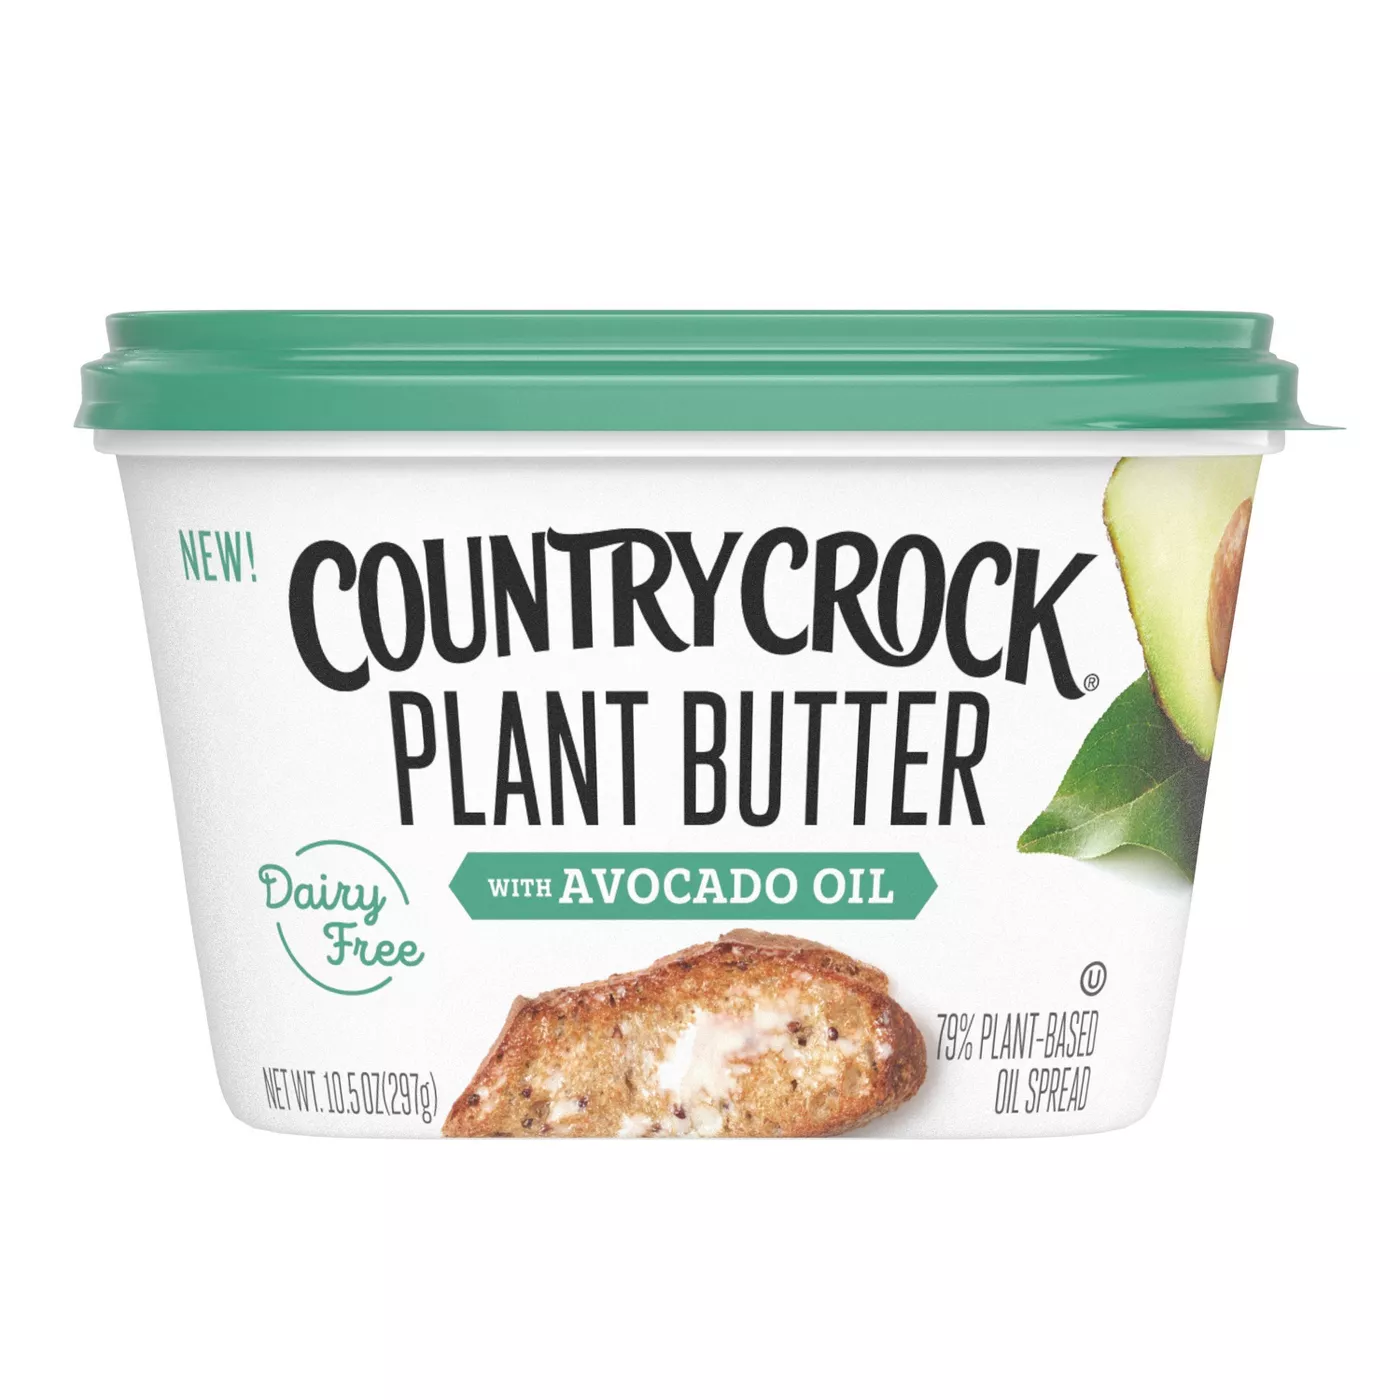 Country Crock Avocado Oil Plant Butter - 10.5oz - image 1 of 7